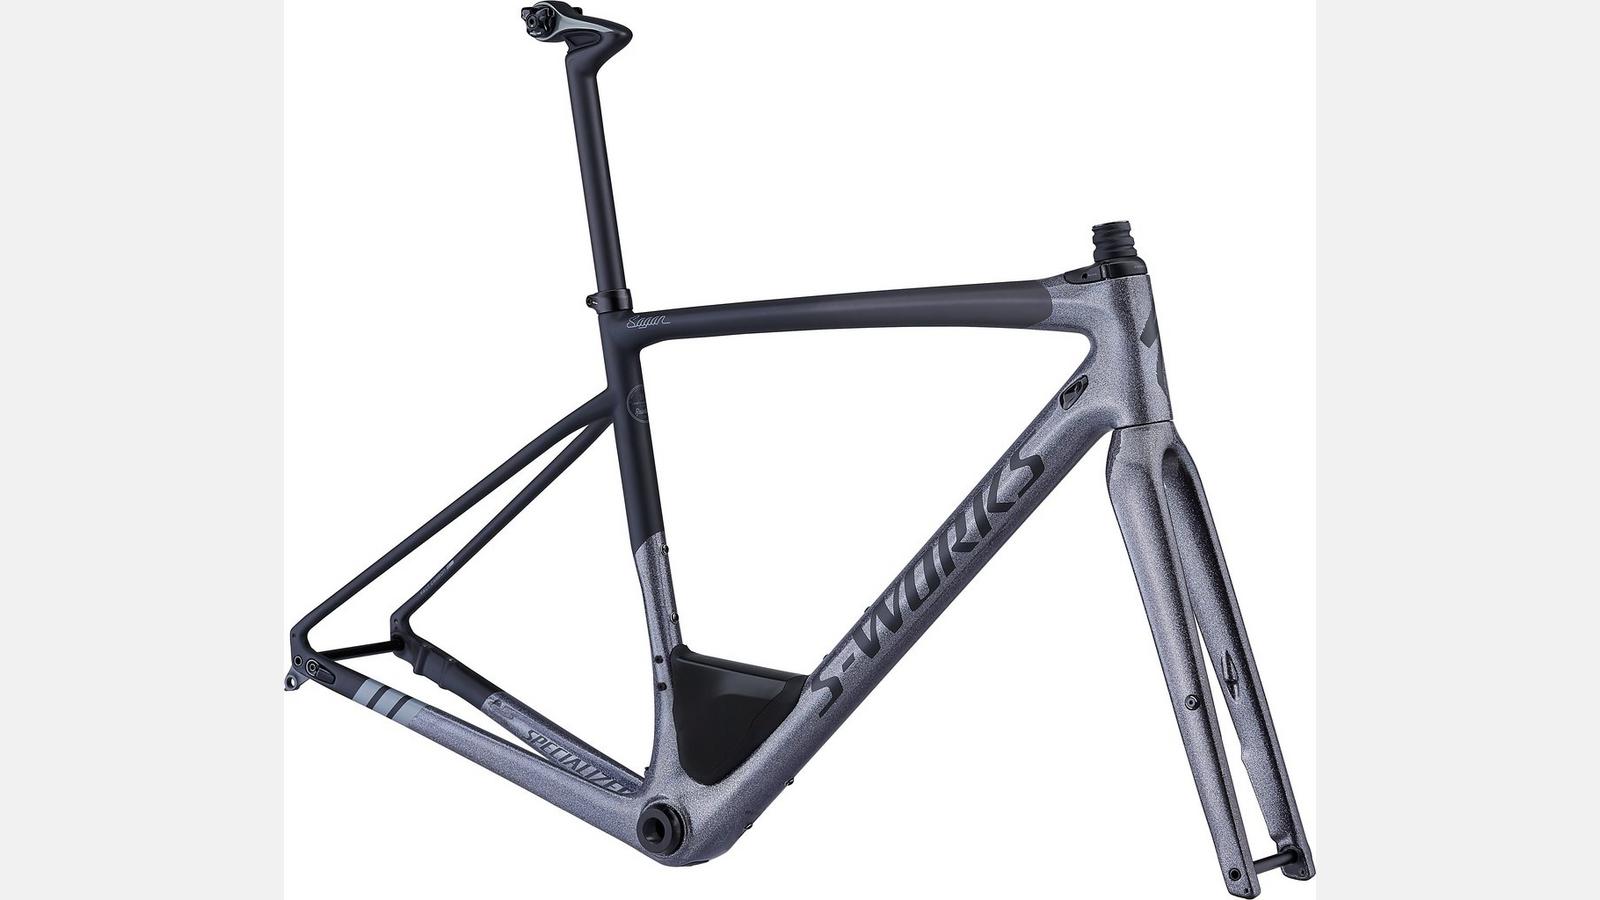 Paint for 2018 Specialized Men's S-Works Diverge Frameset – Sagan Collection - Satin Charcoal